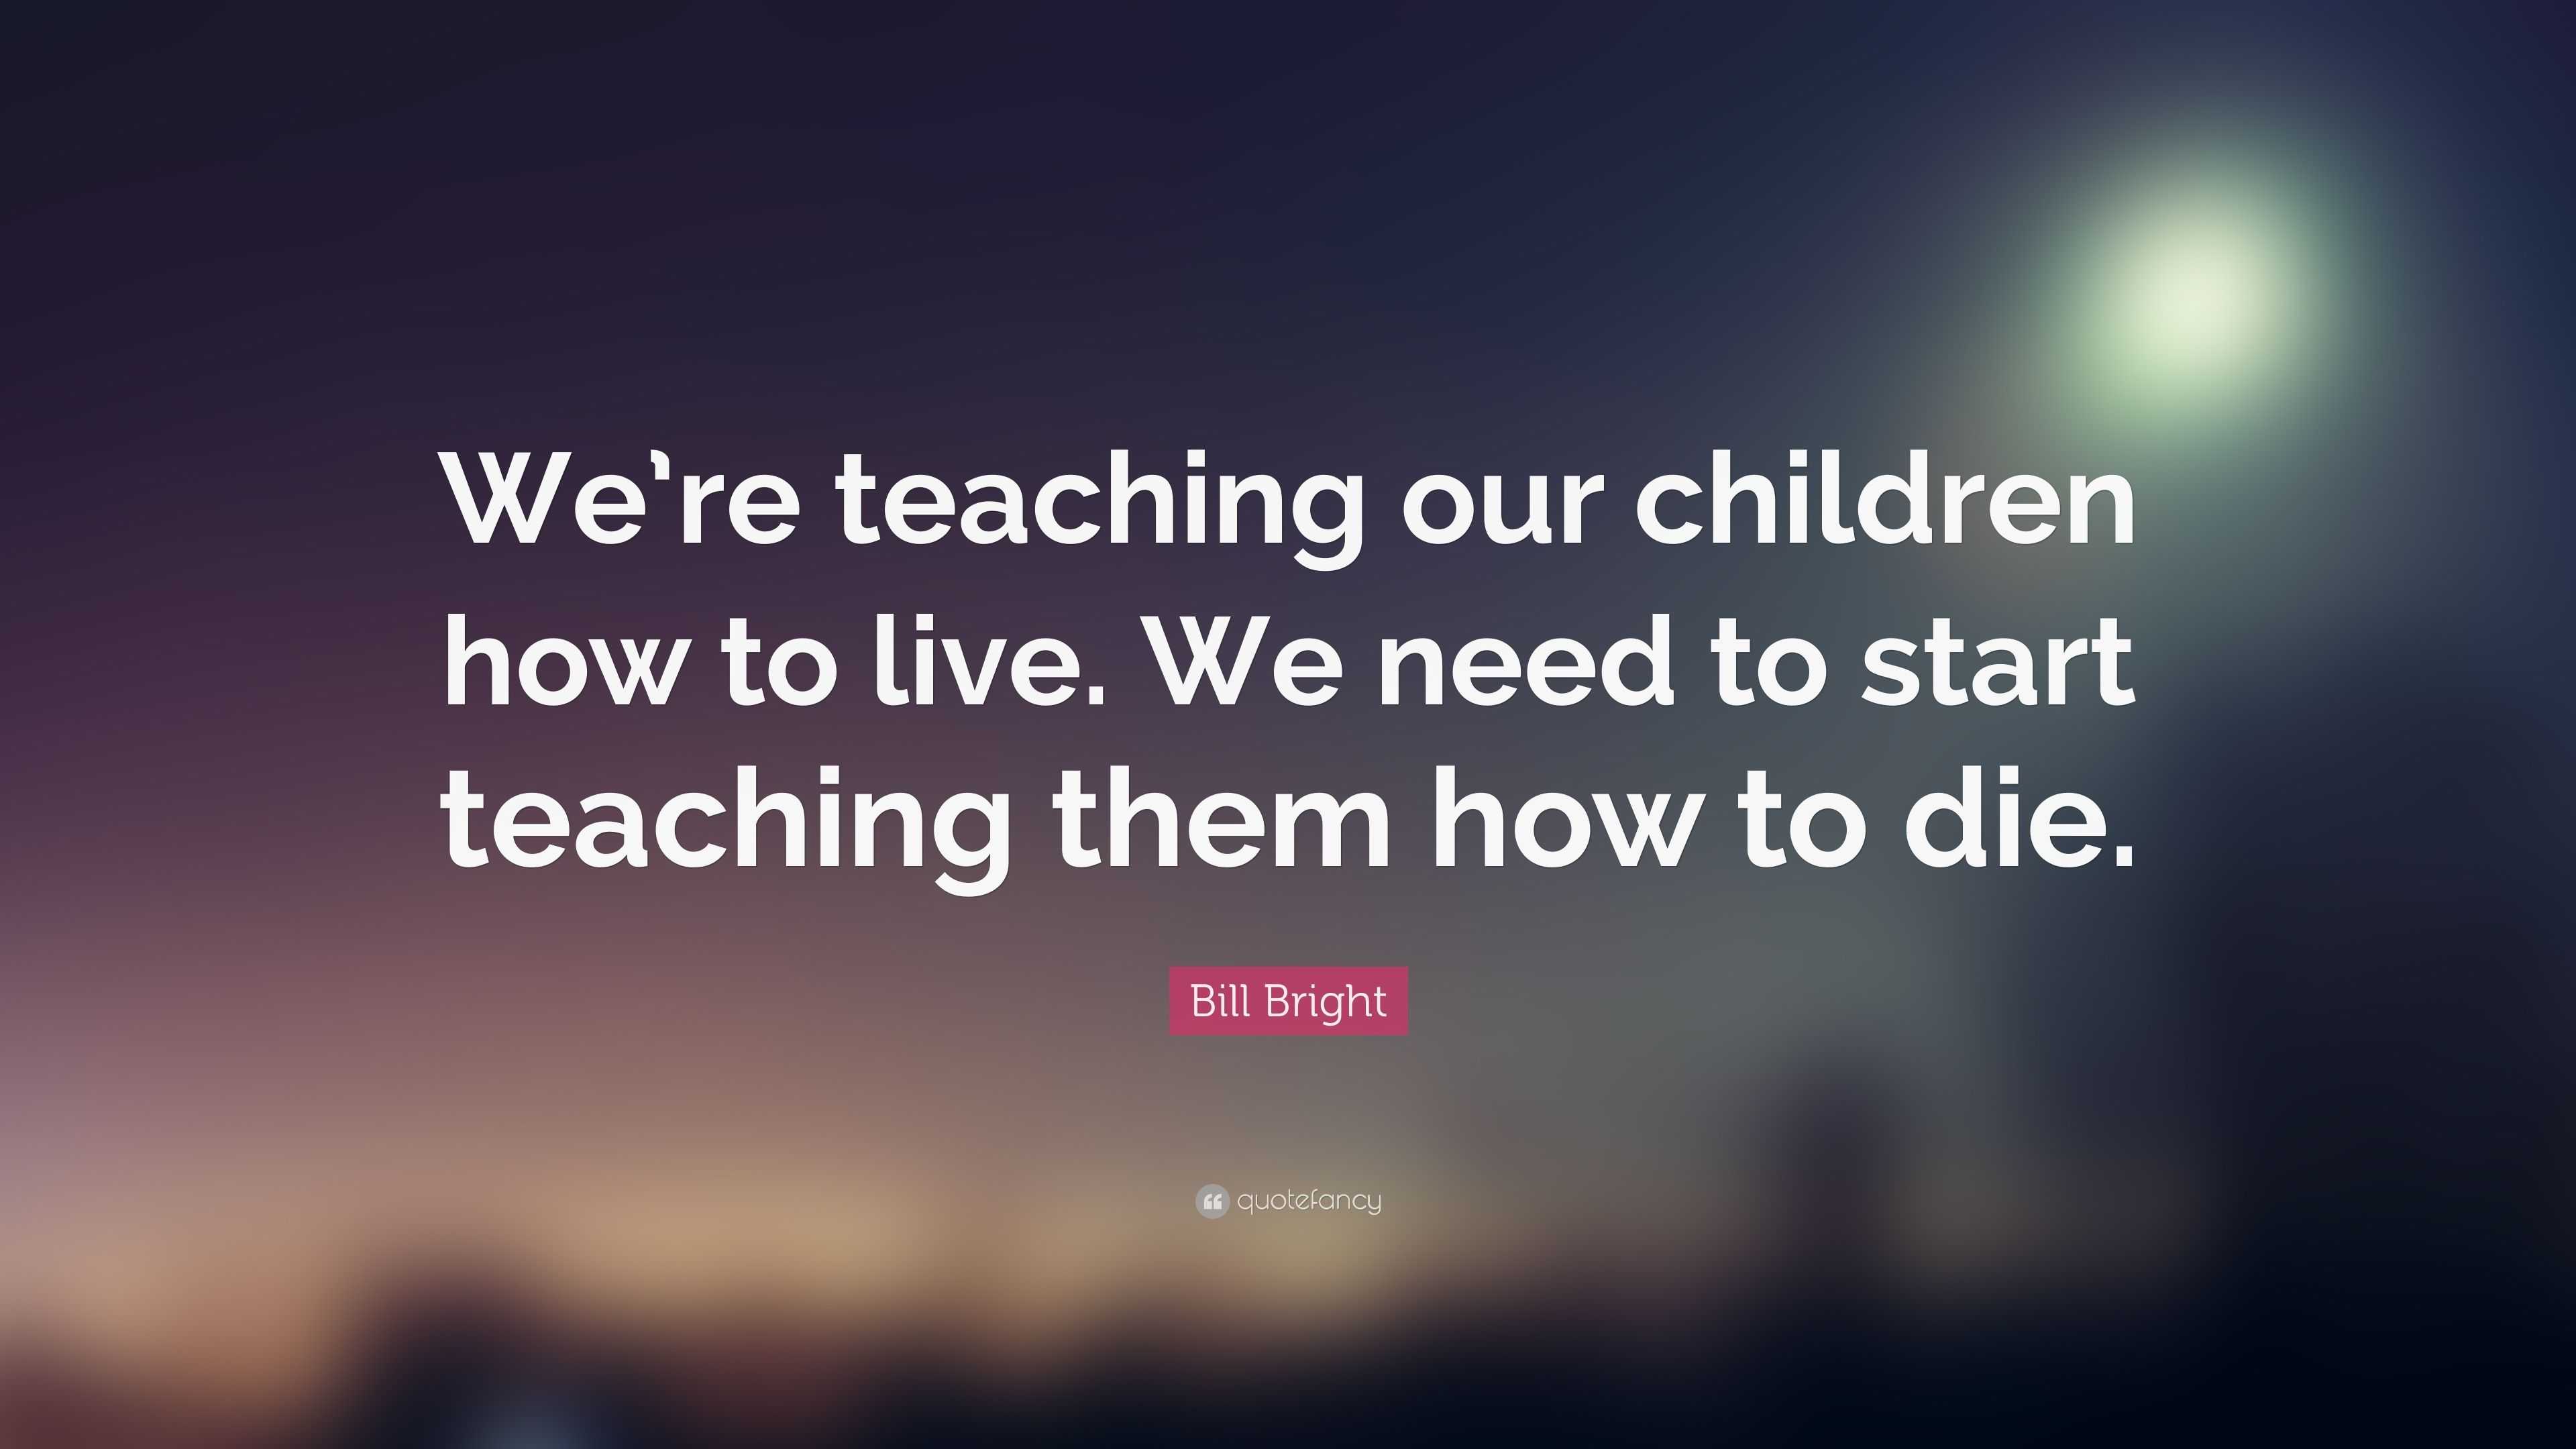 Bill Bright Quote: “We’re teaching our children how to live. We need to ...